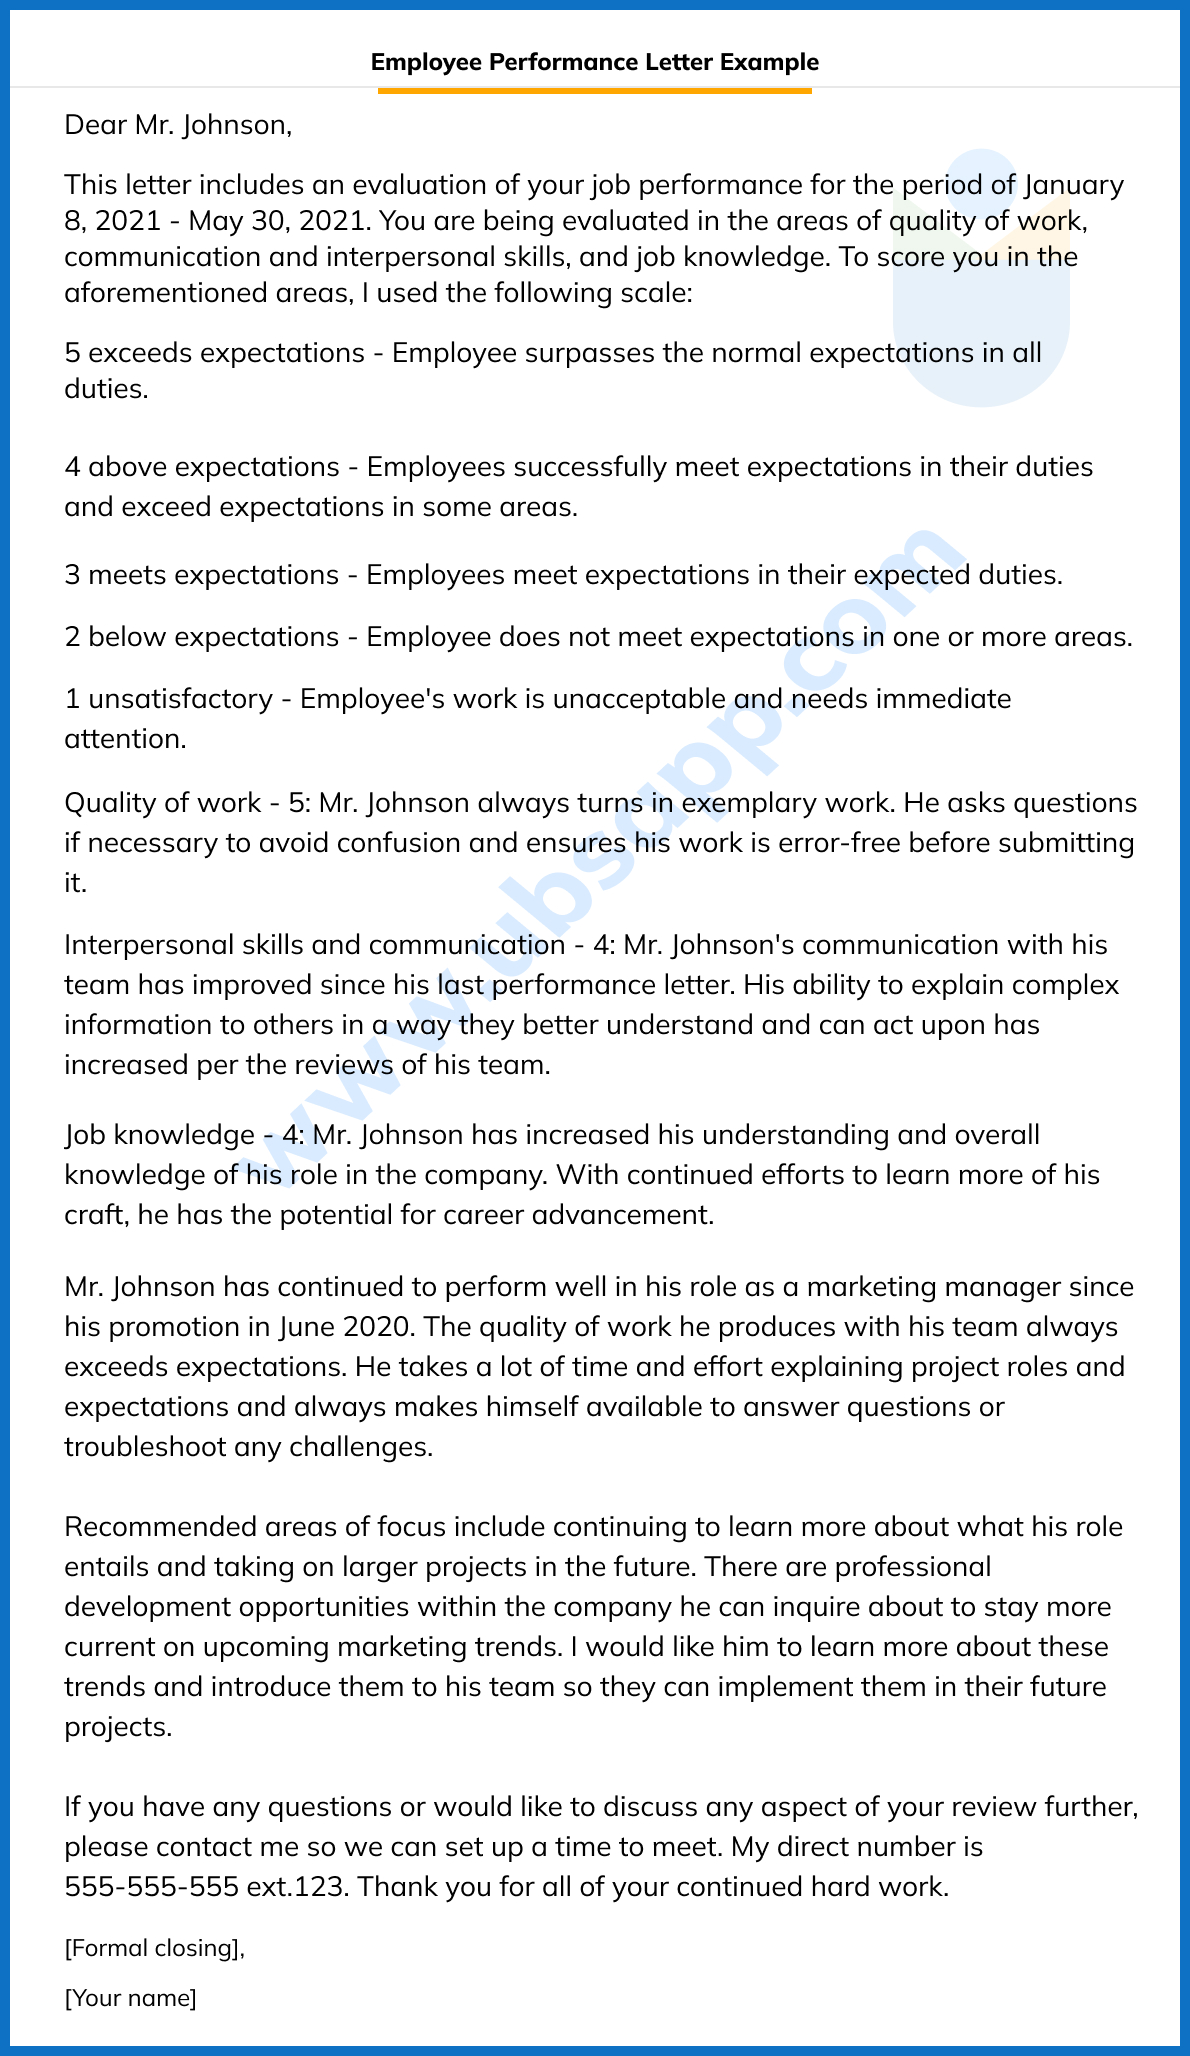 Employee Performance Letter Example